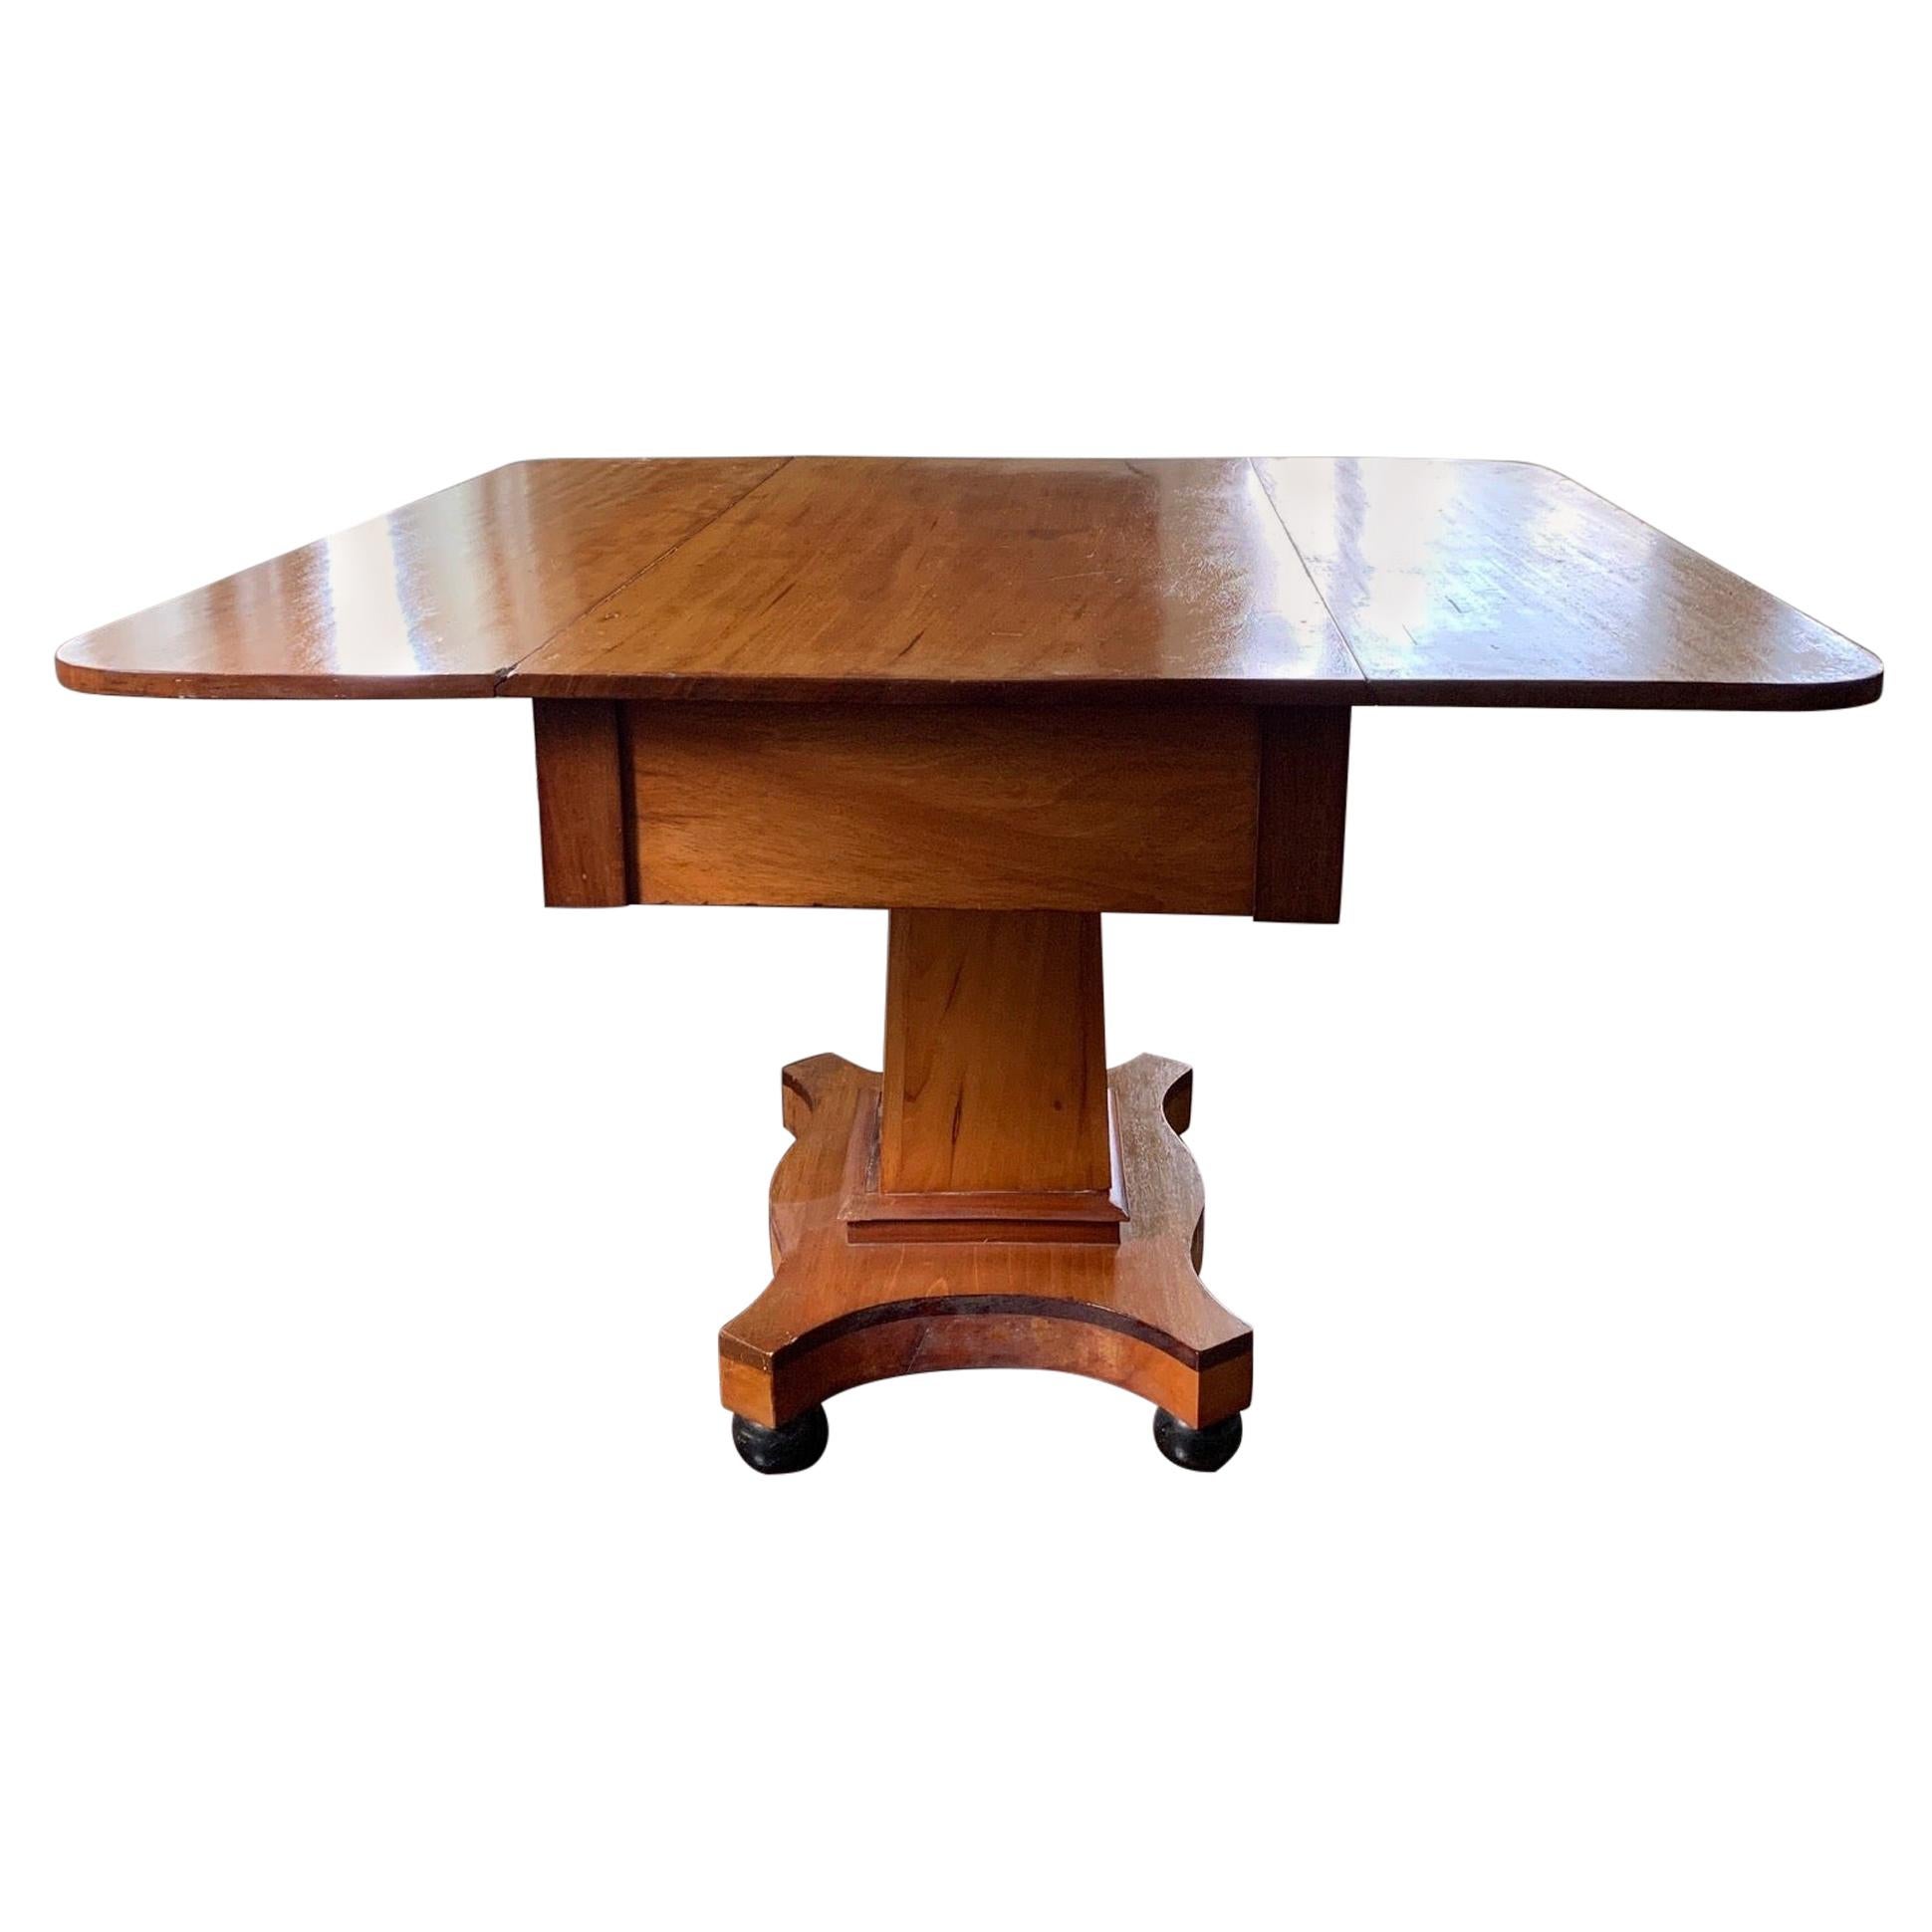 American Empire Drop Leaf Table, c. 1880 by S. K. Pierce & Son, Co. For Sale